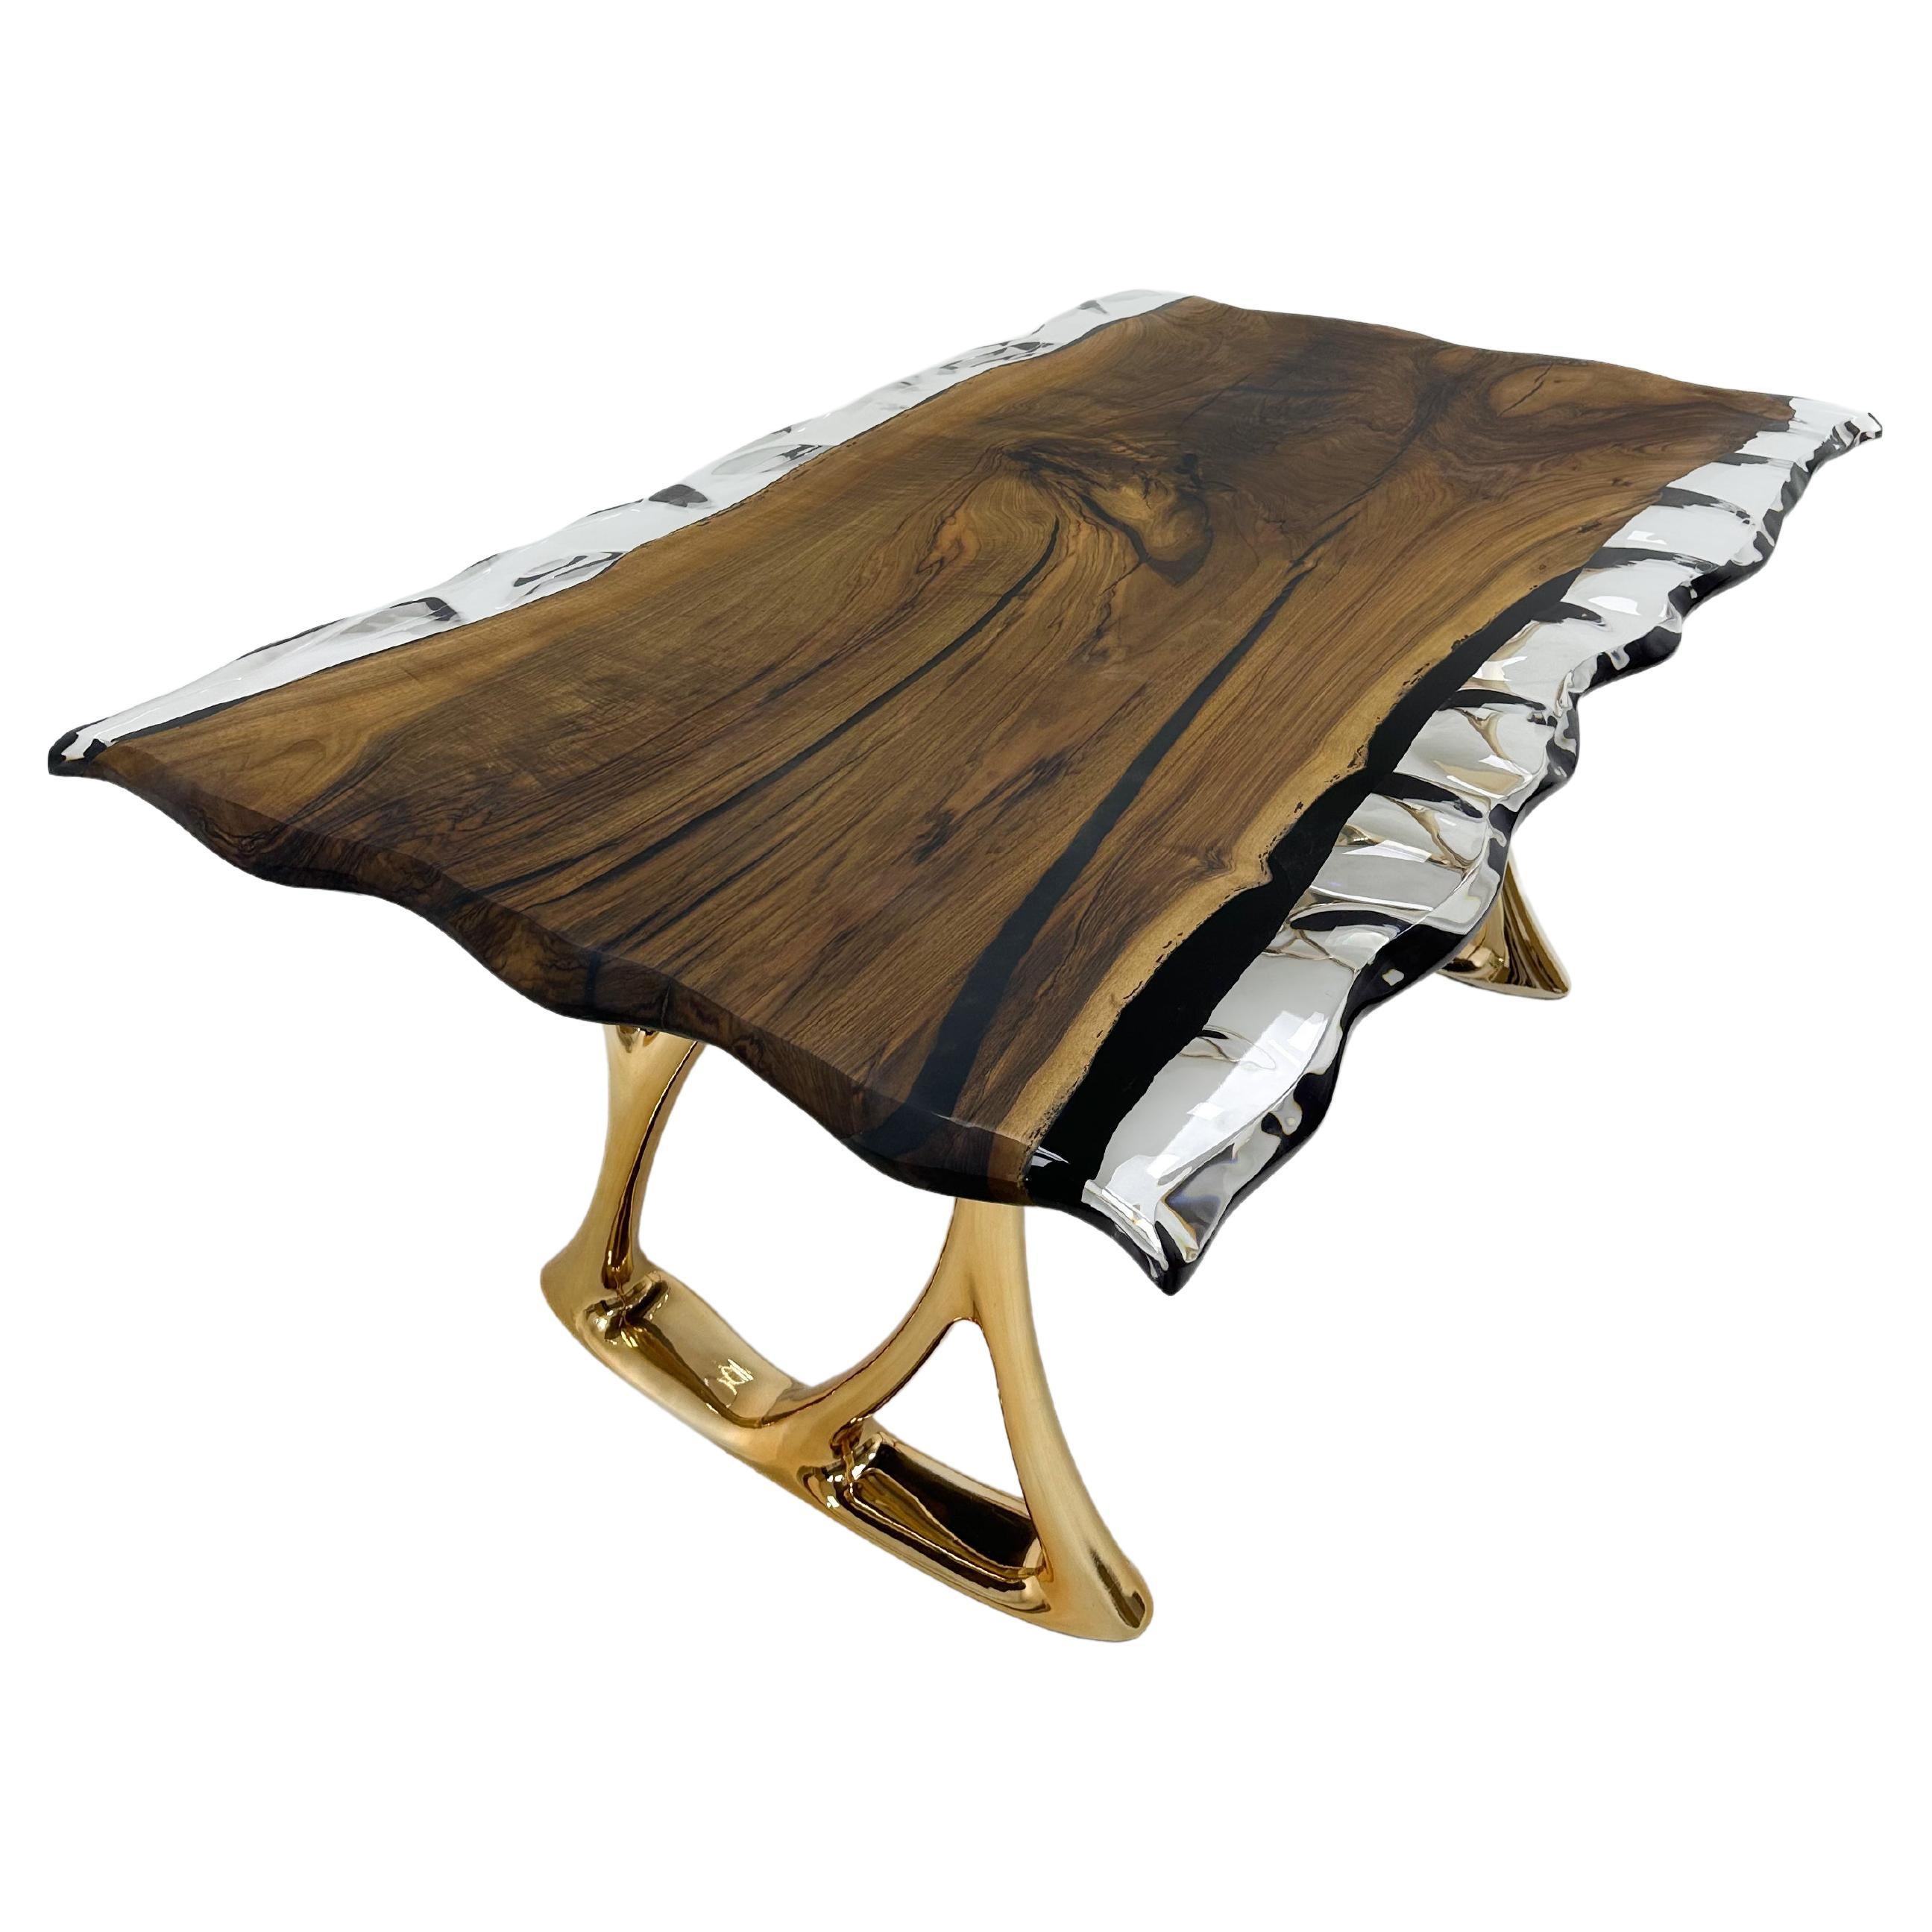 Custom Clear Epoxy Resin Walnut Wood Dining Table - Natural Wood Table